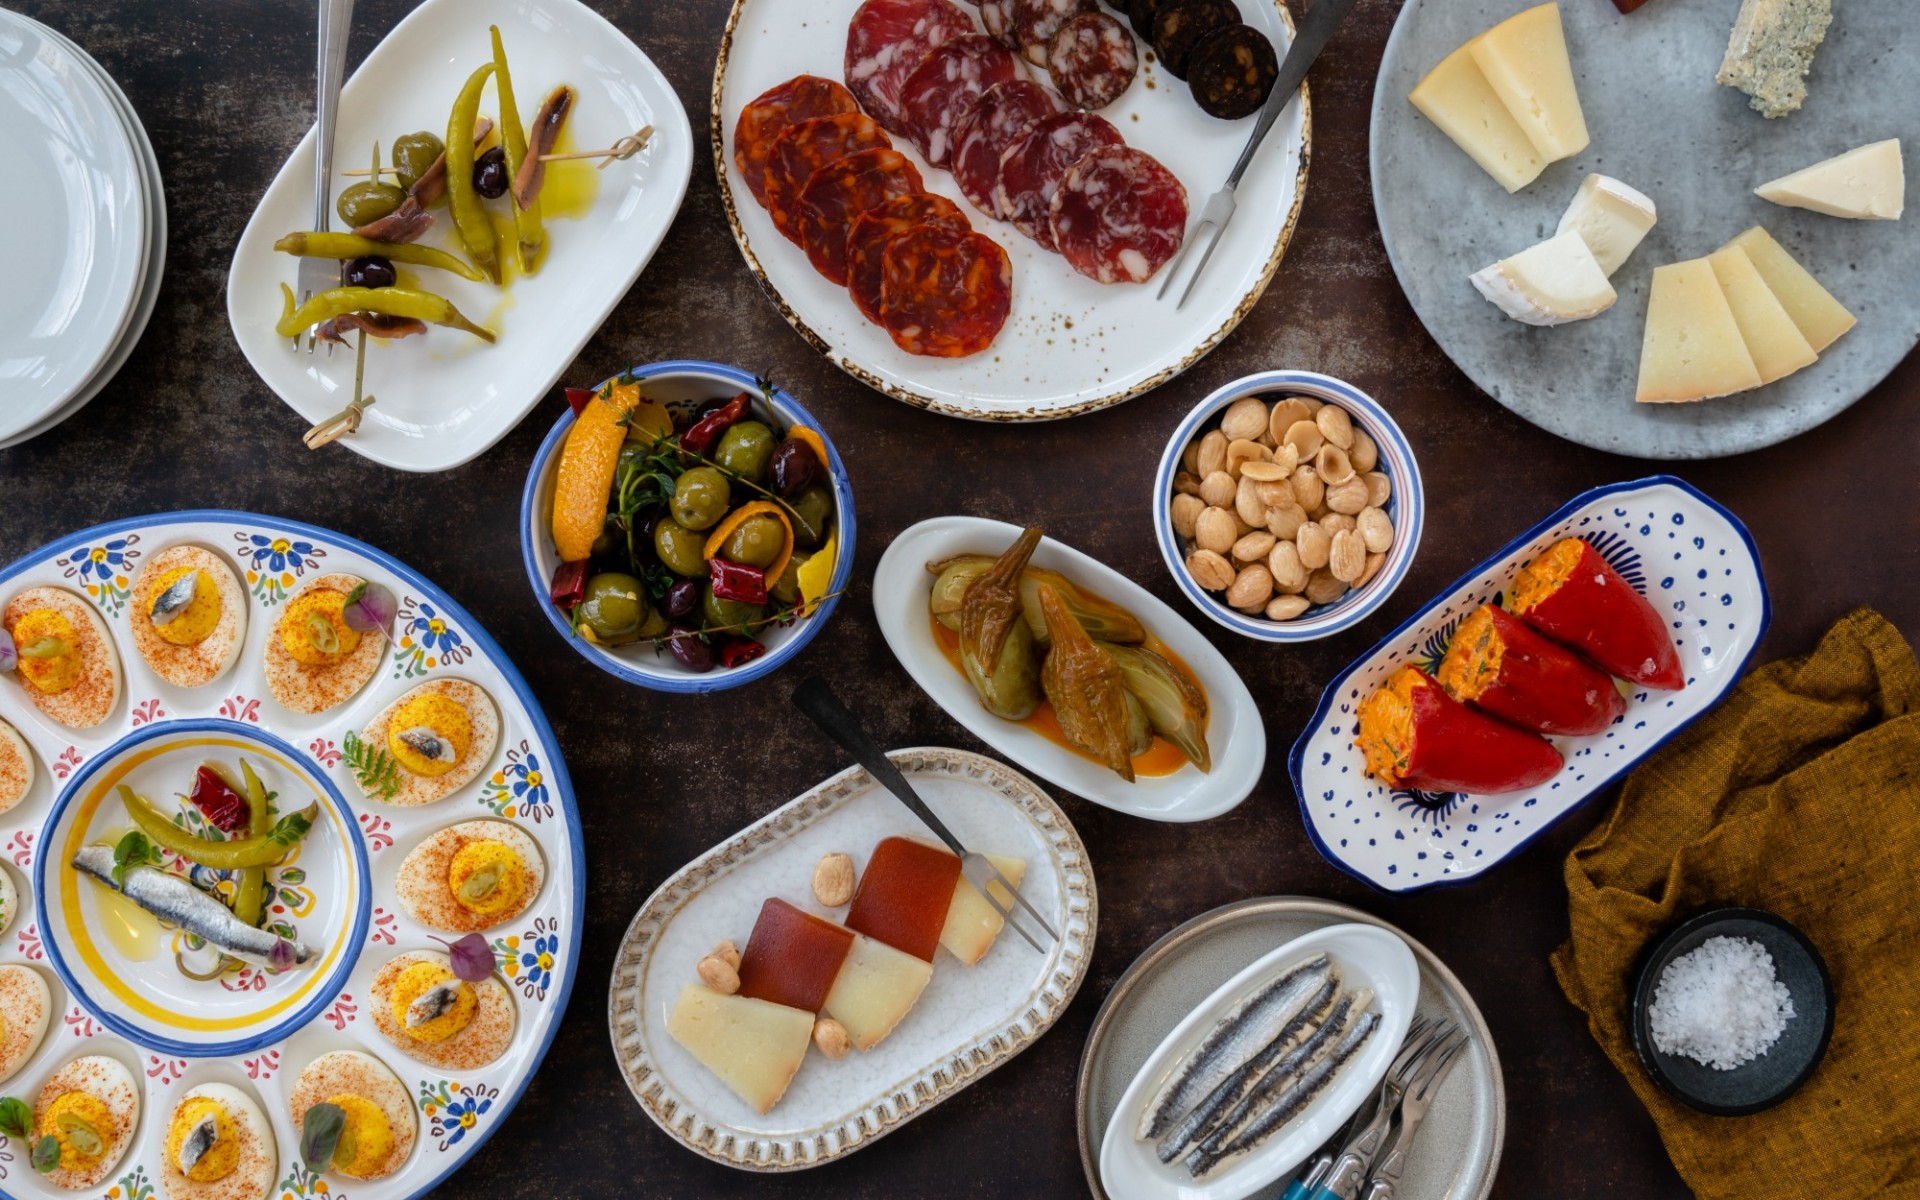 A selection of cured meats, cheese, deviled eggs, and peppers available at Olivia.